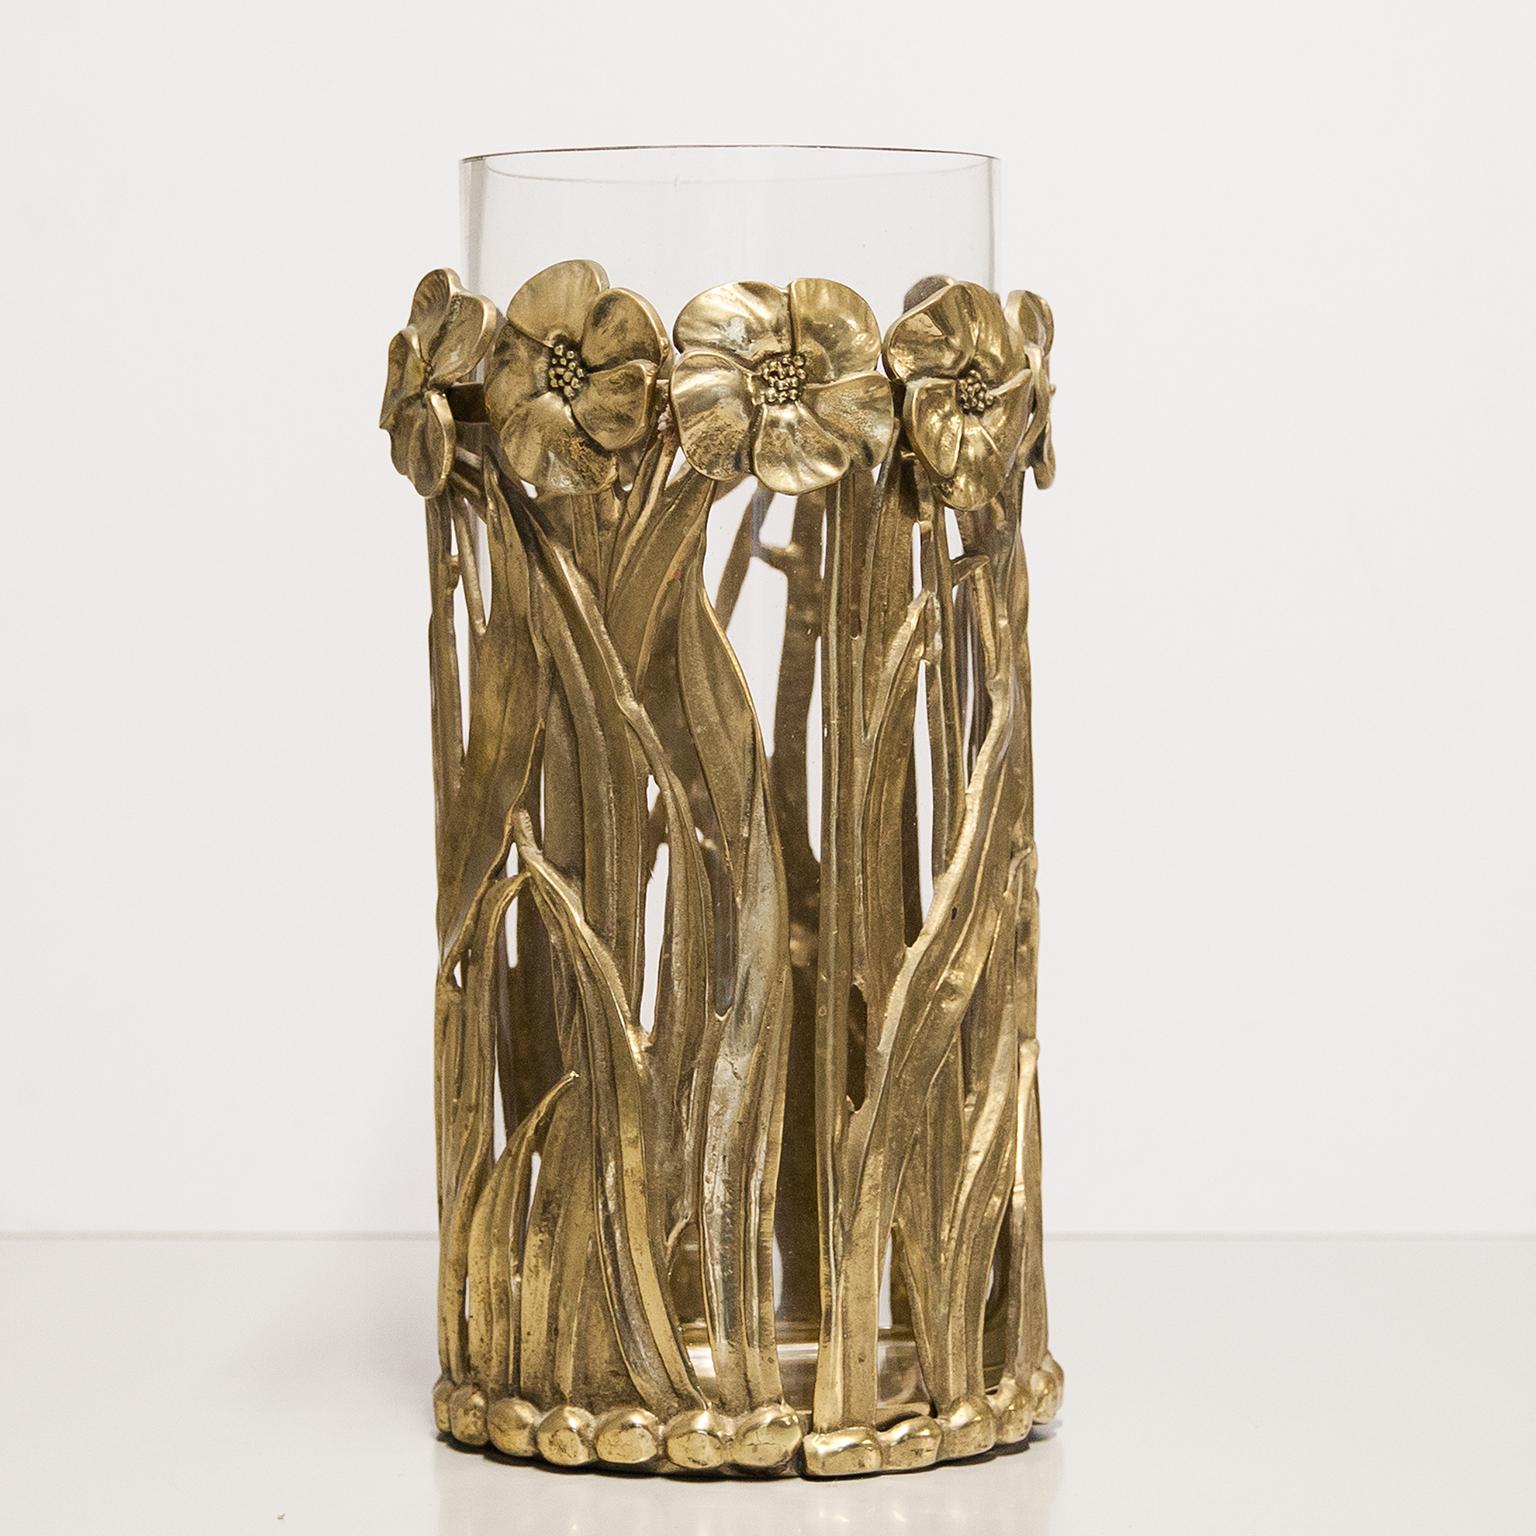 Elegant and high quality made umbrella stand or flower vase made in polished bronze and with a thick glass inlay in the manner of Art Nouveau, made in France in the 1970s.